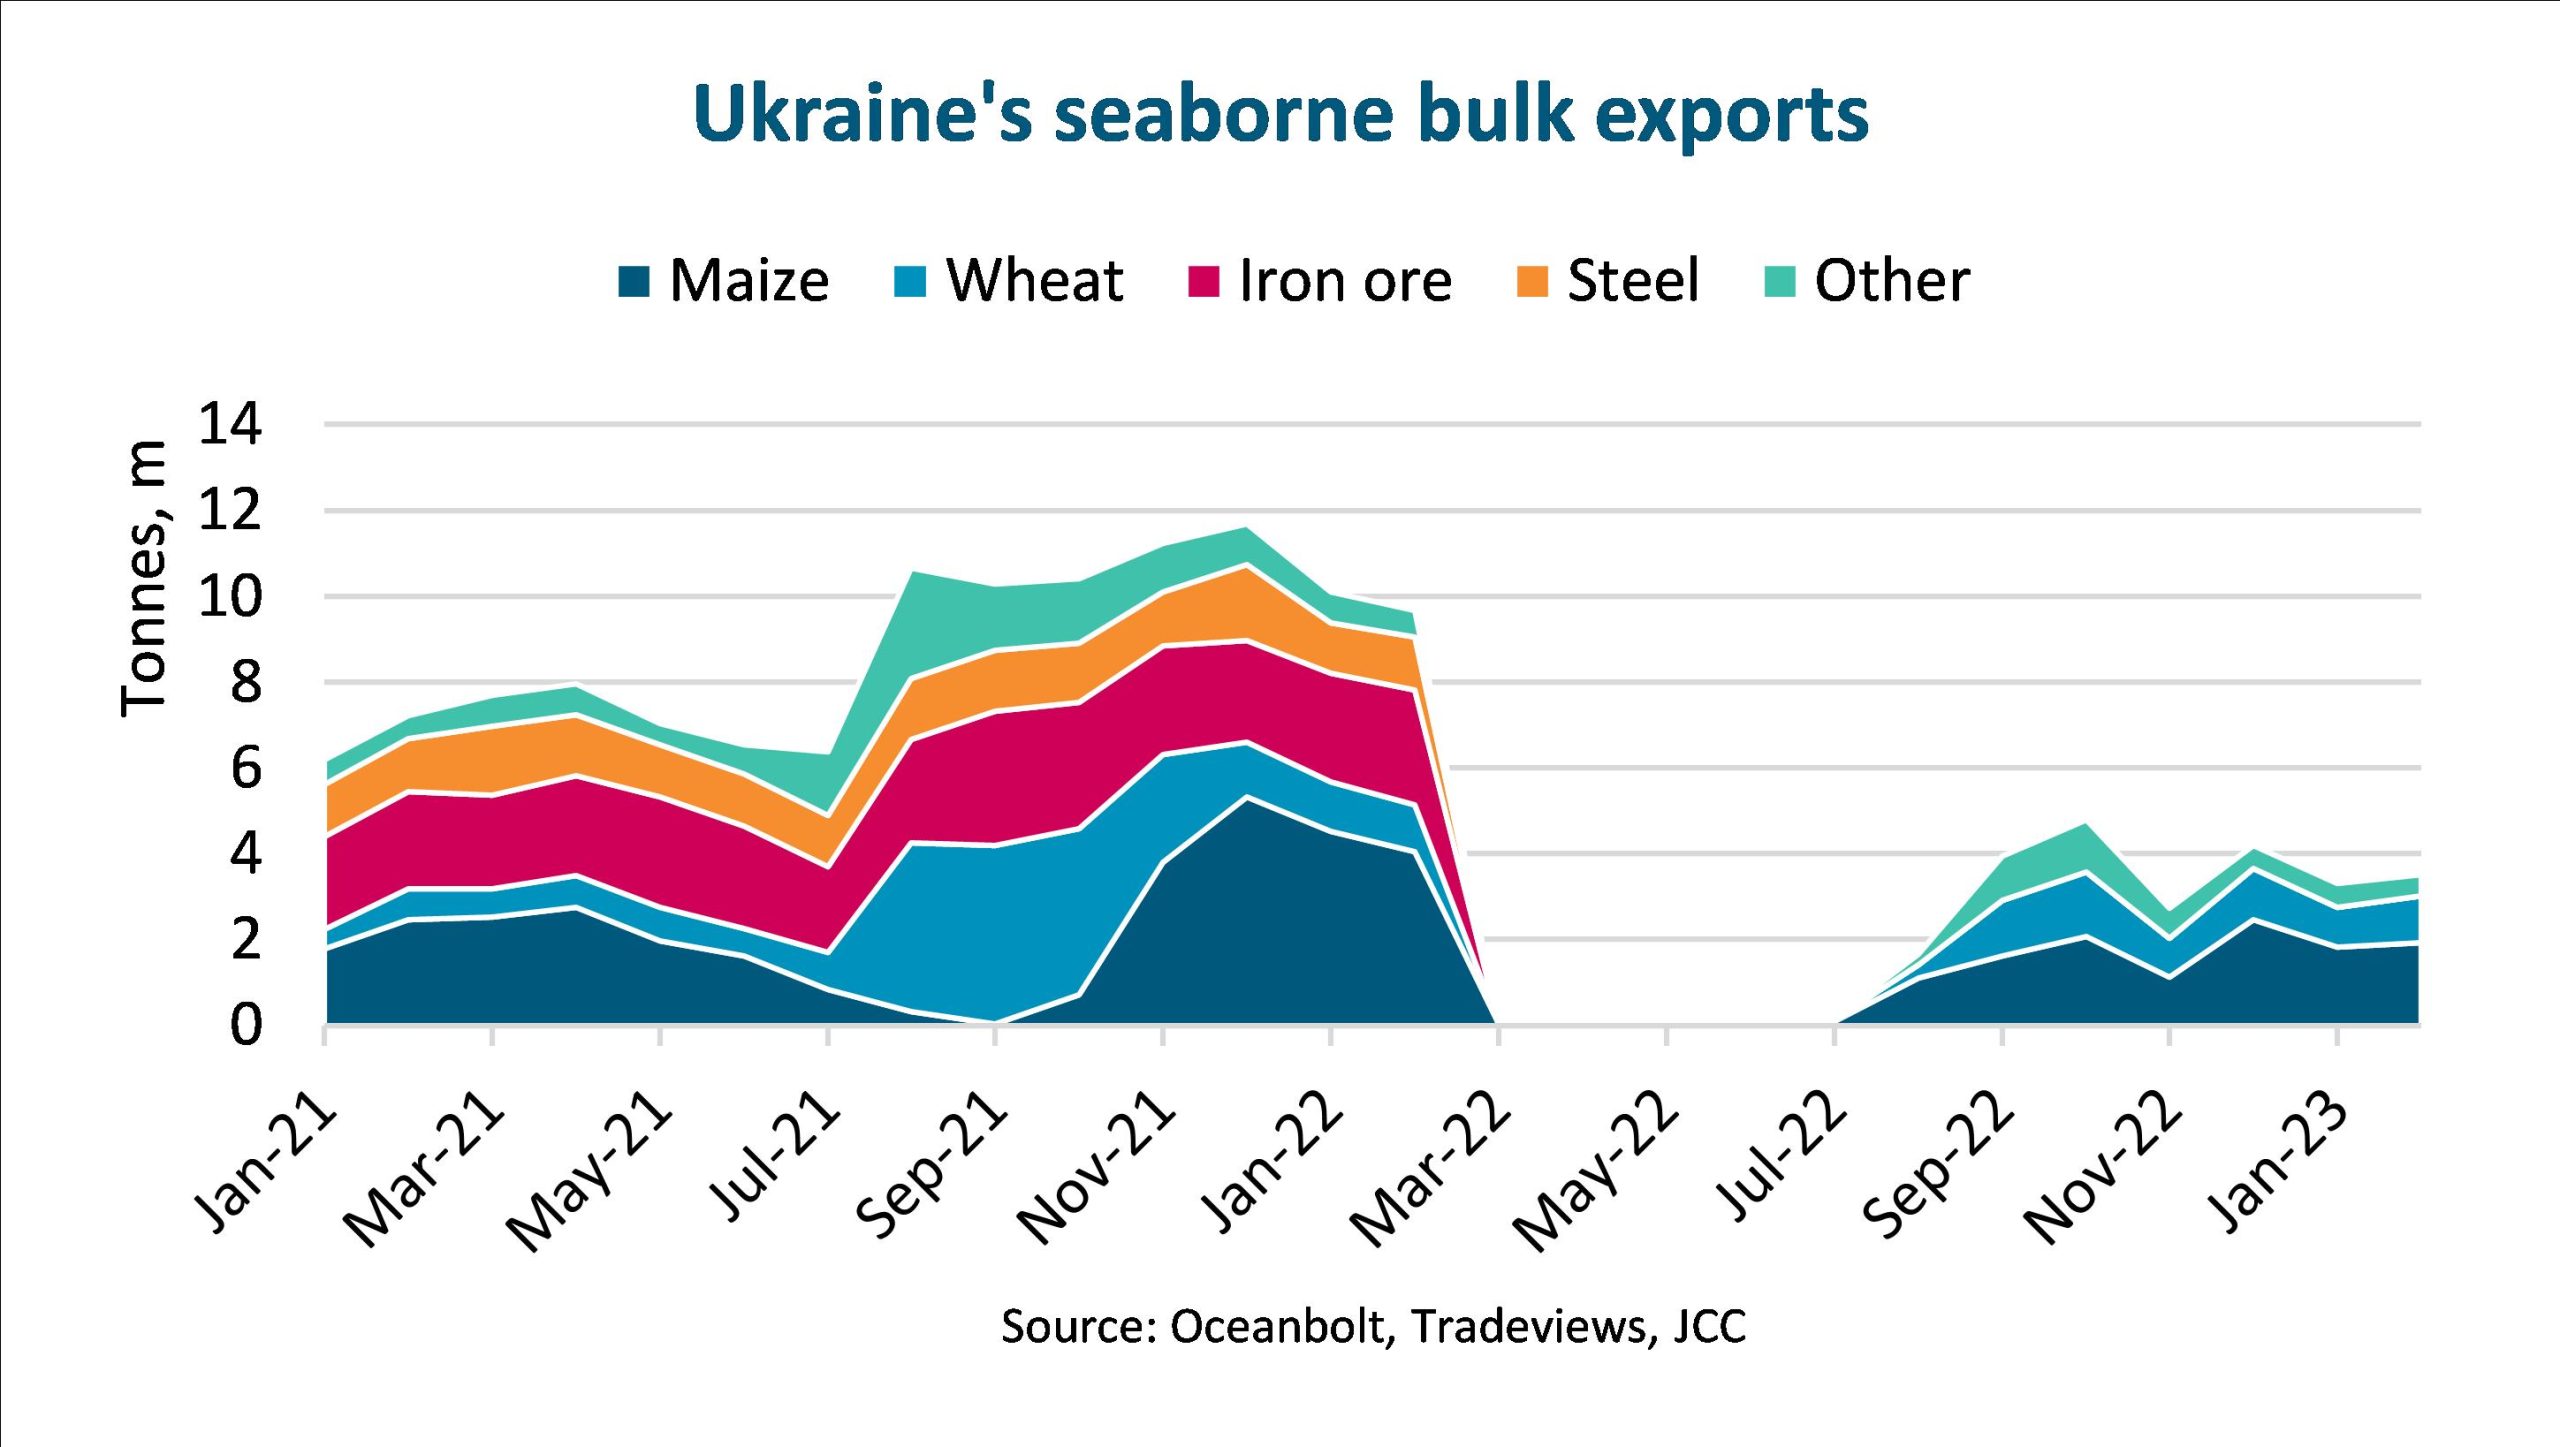 Ukraine’s dry bulk exports have plunged 77.8% during one year of war